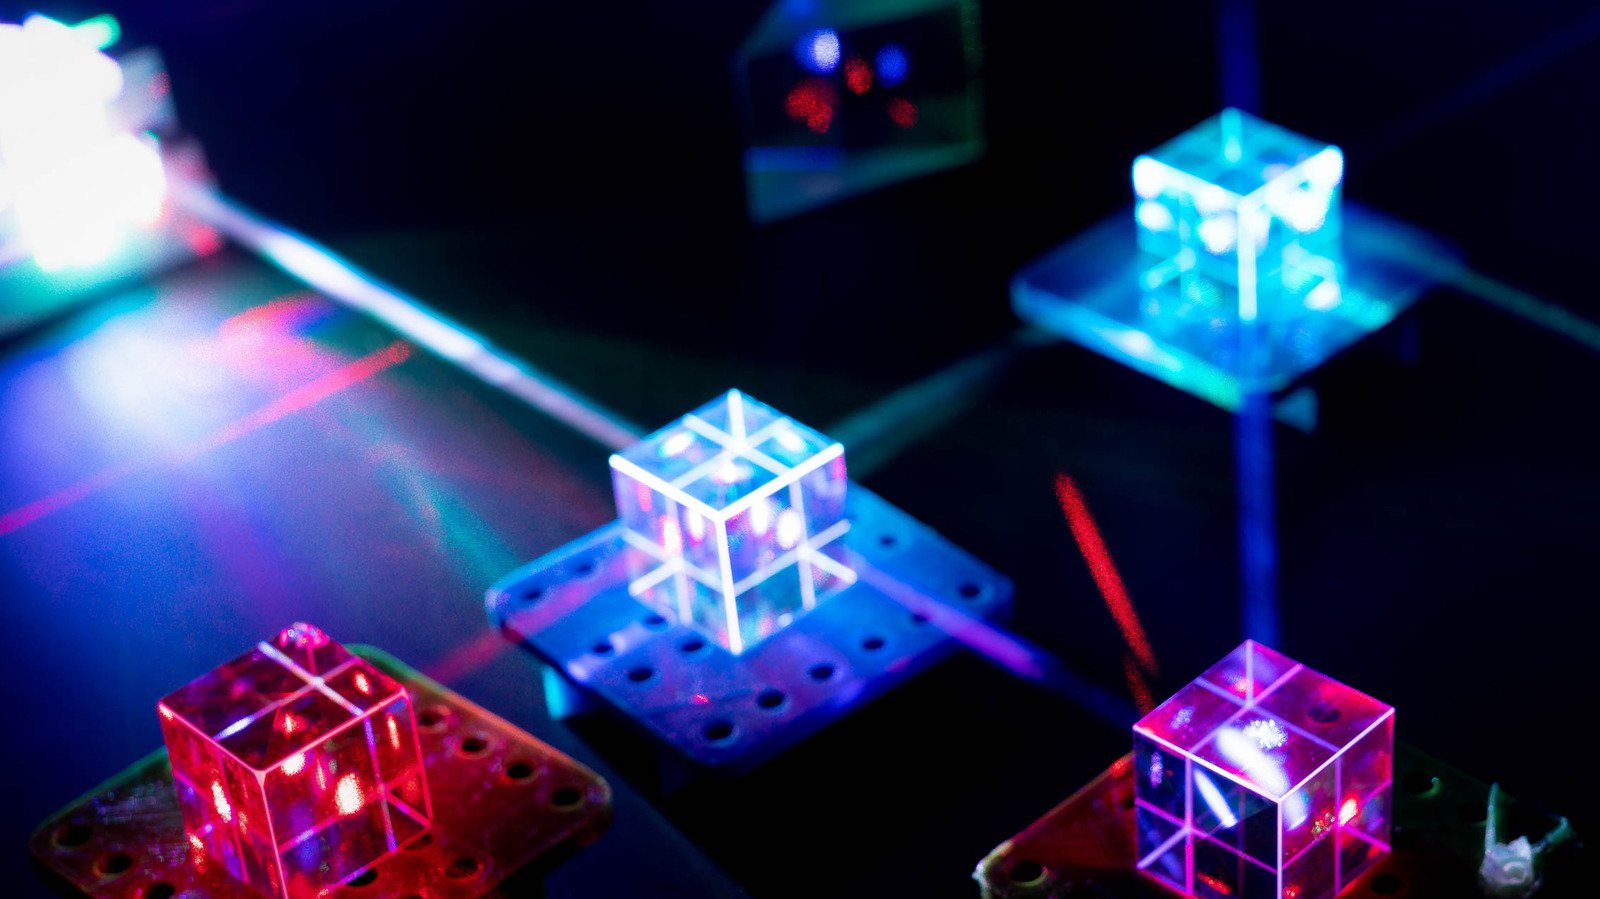 This Quantum Crystal Defies The Normal Laws Of Physics